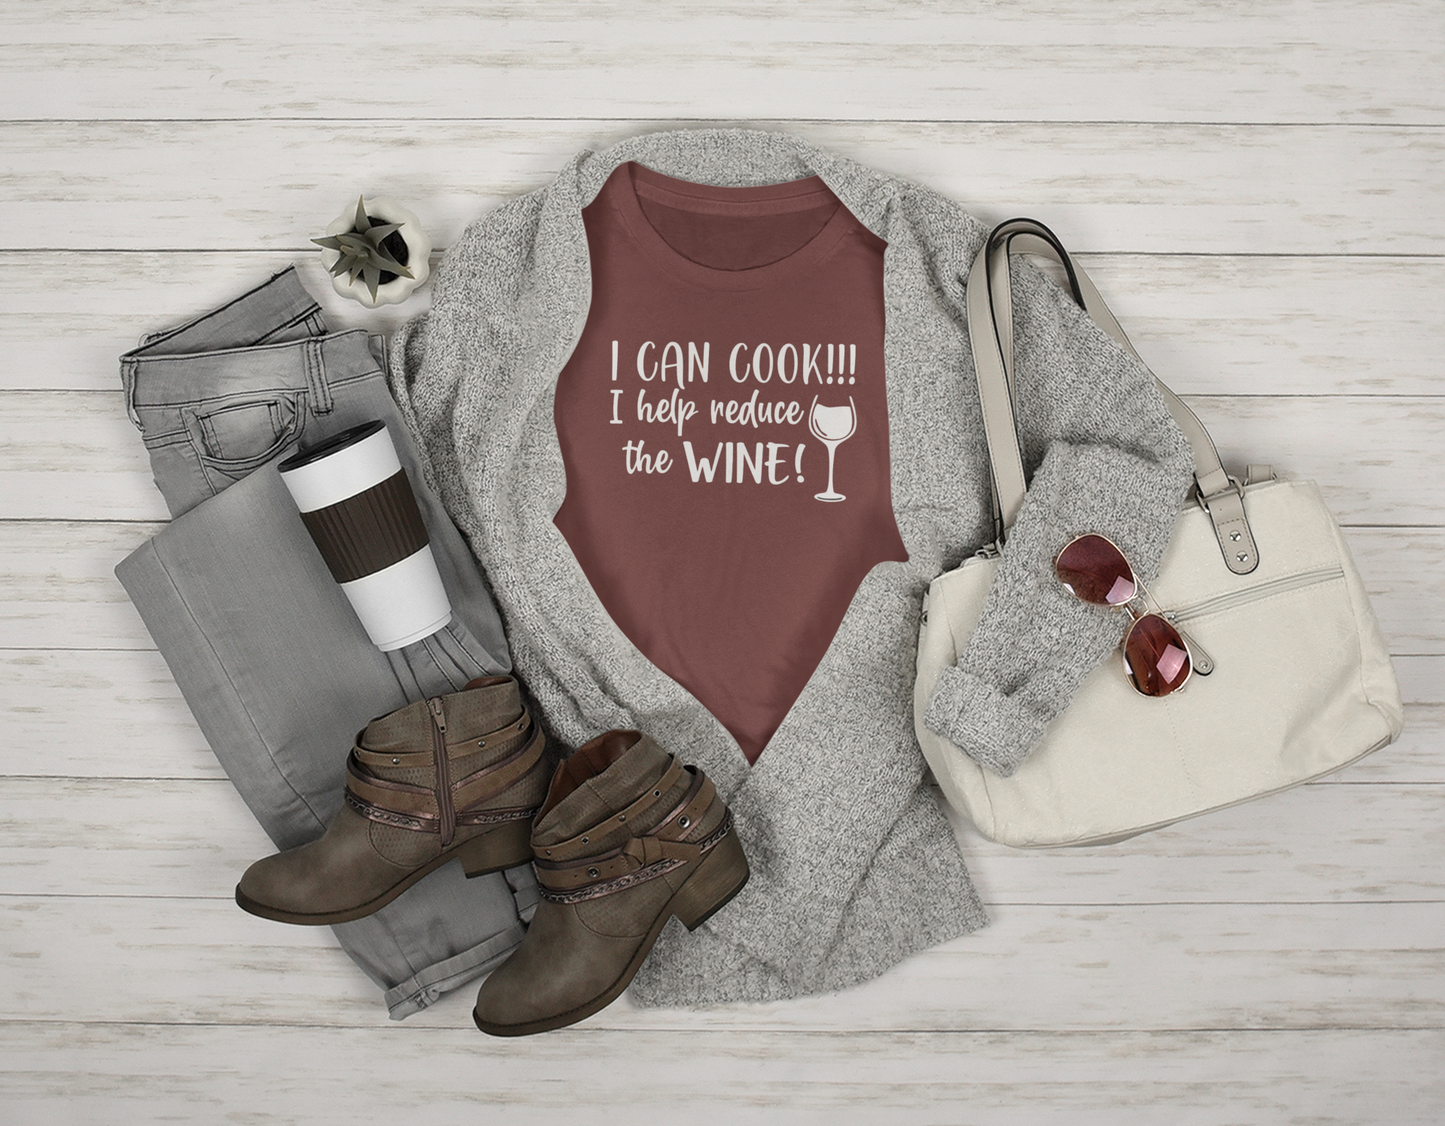 I Can Cook T-Shirt in maroon in a stylized setting featuring a white purse, sunglasses, brown boots, gray jeans & sweater with a coffee cup & plant prop on a wooden bcakground